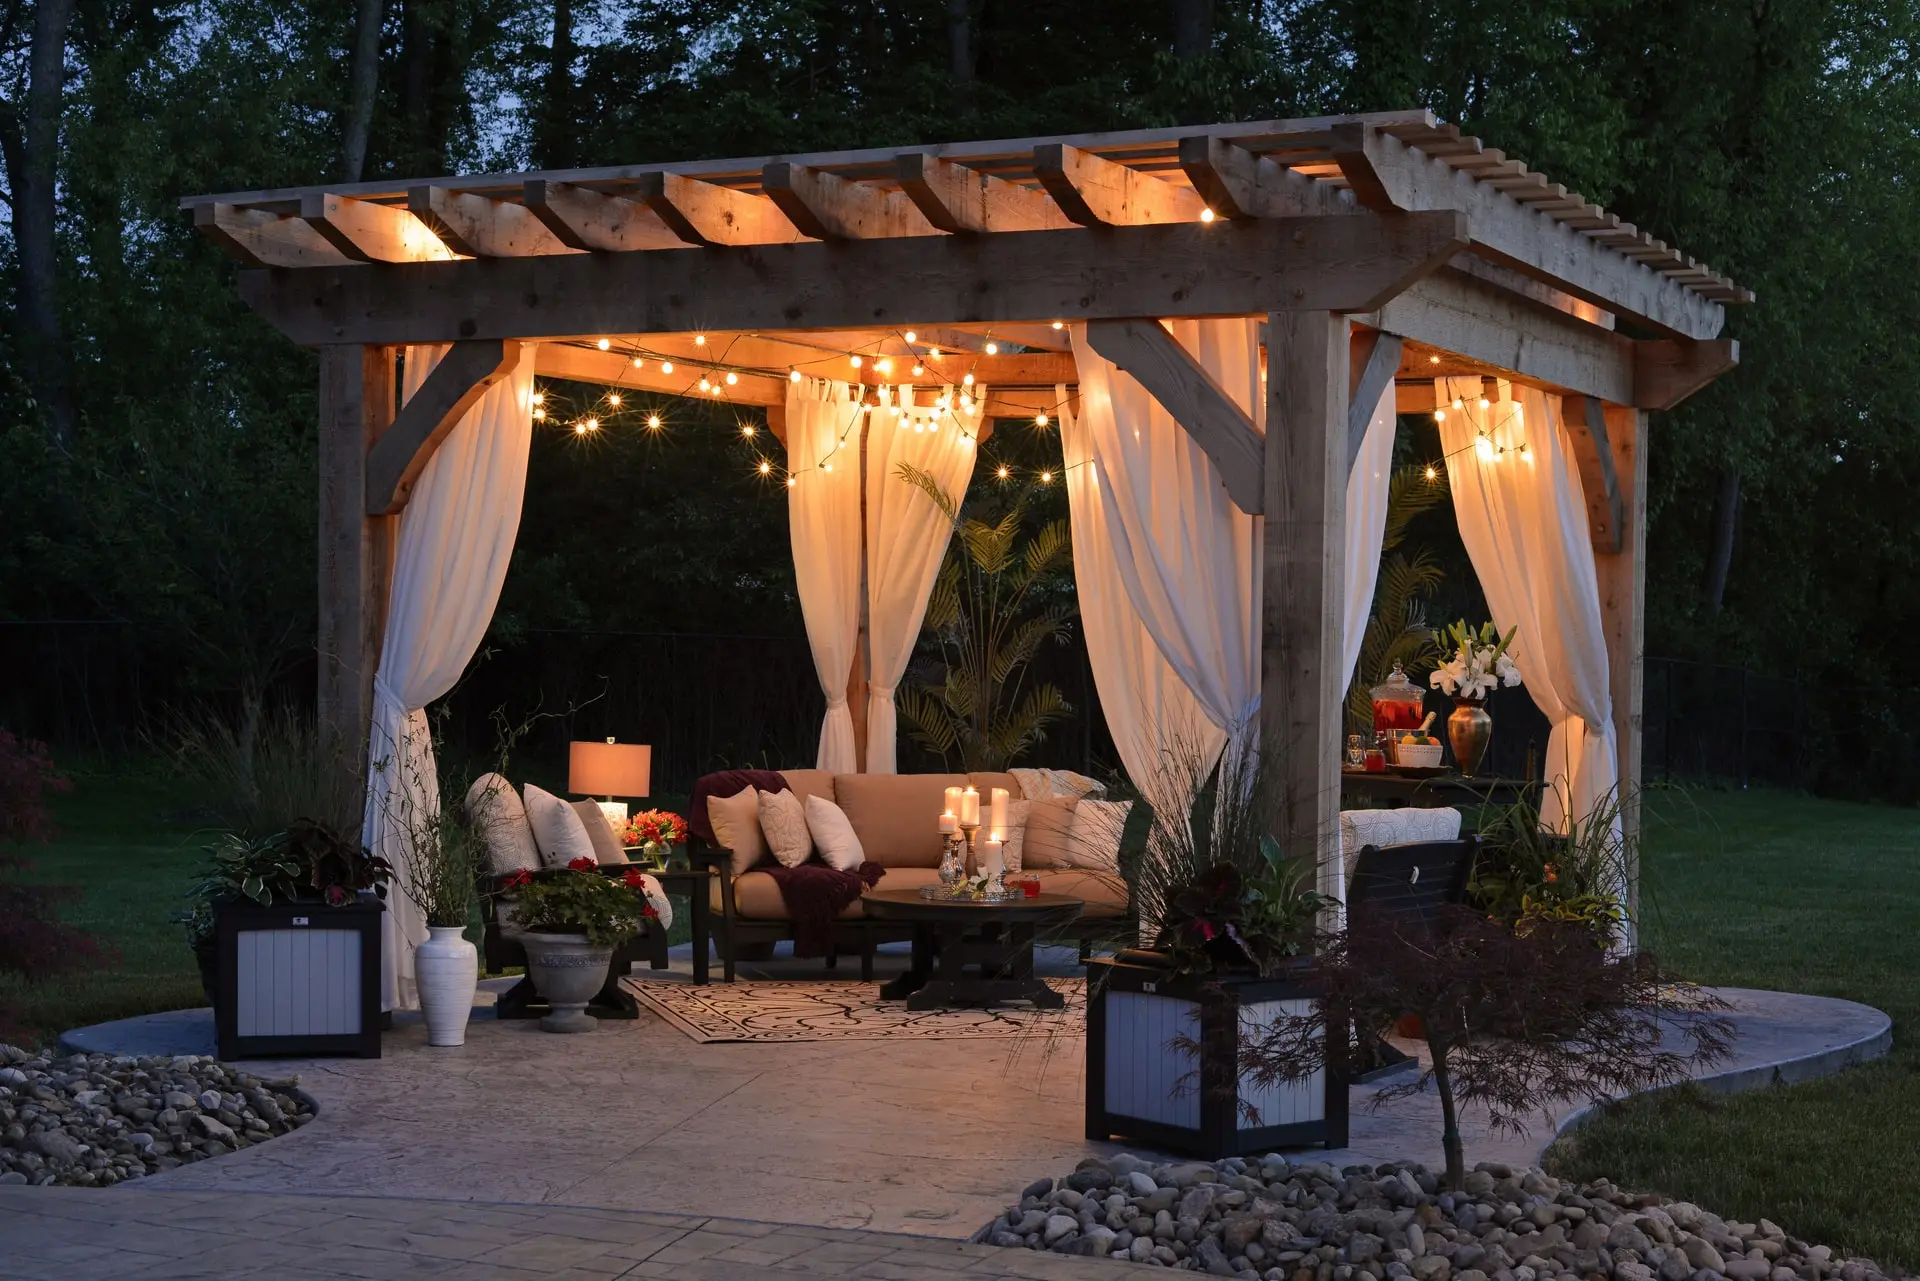 Comprehensive Guidance on Creating Outdoor Havens